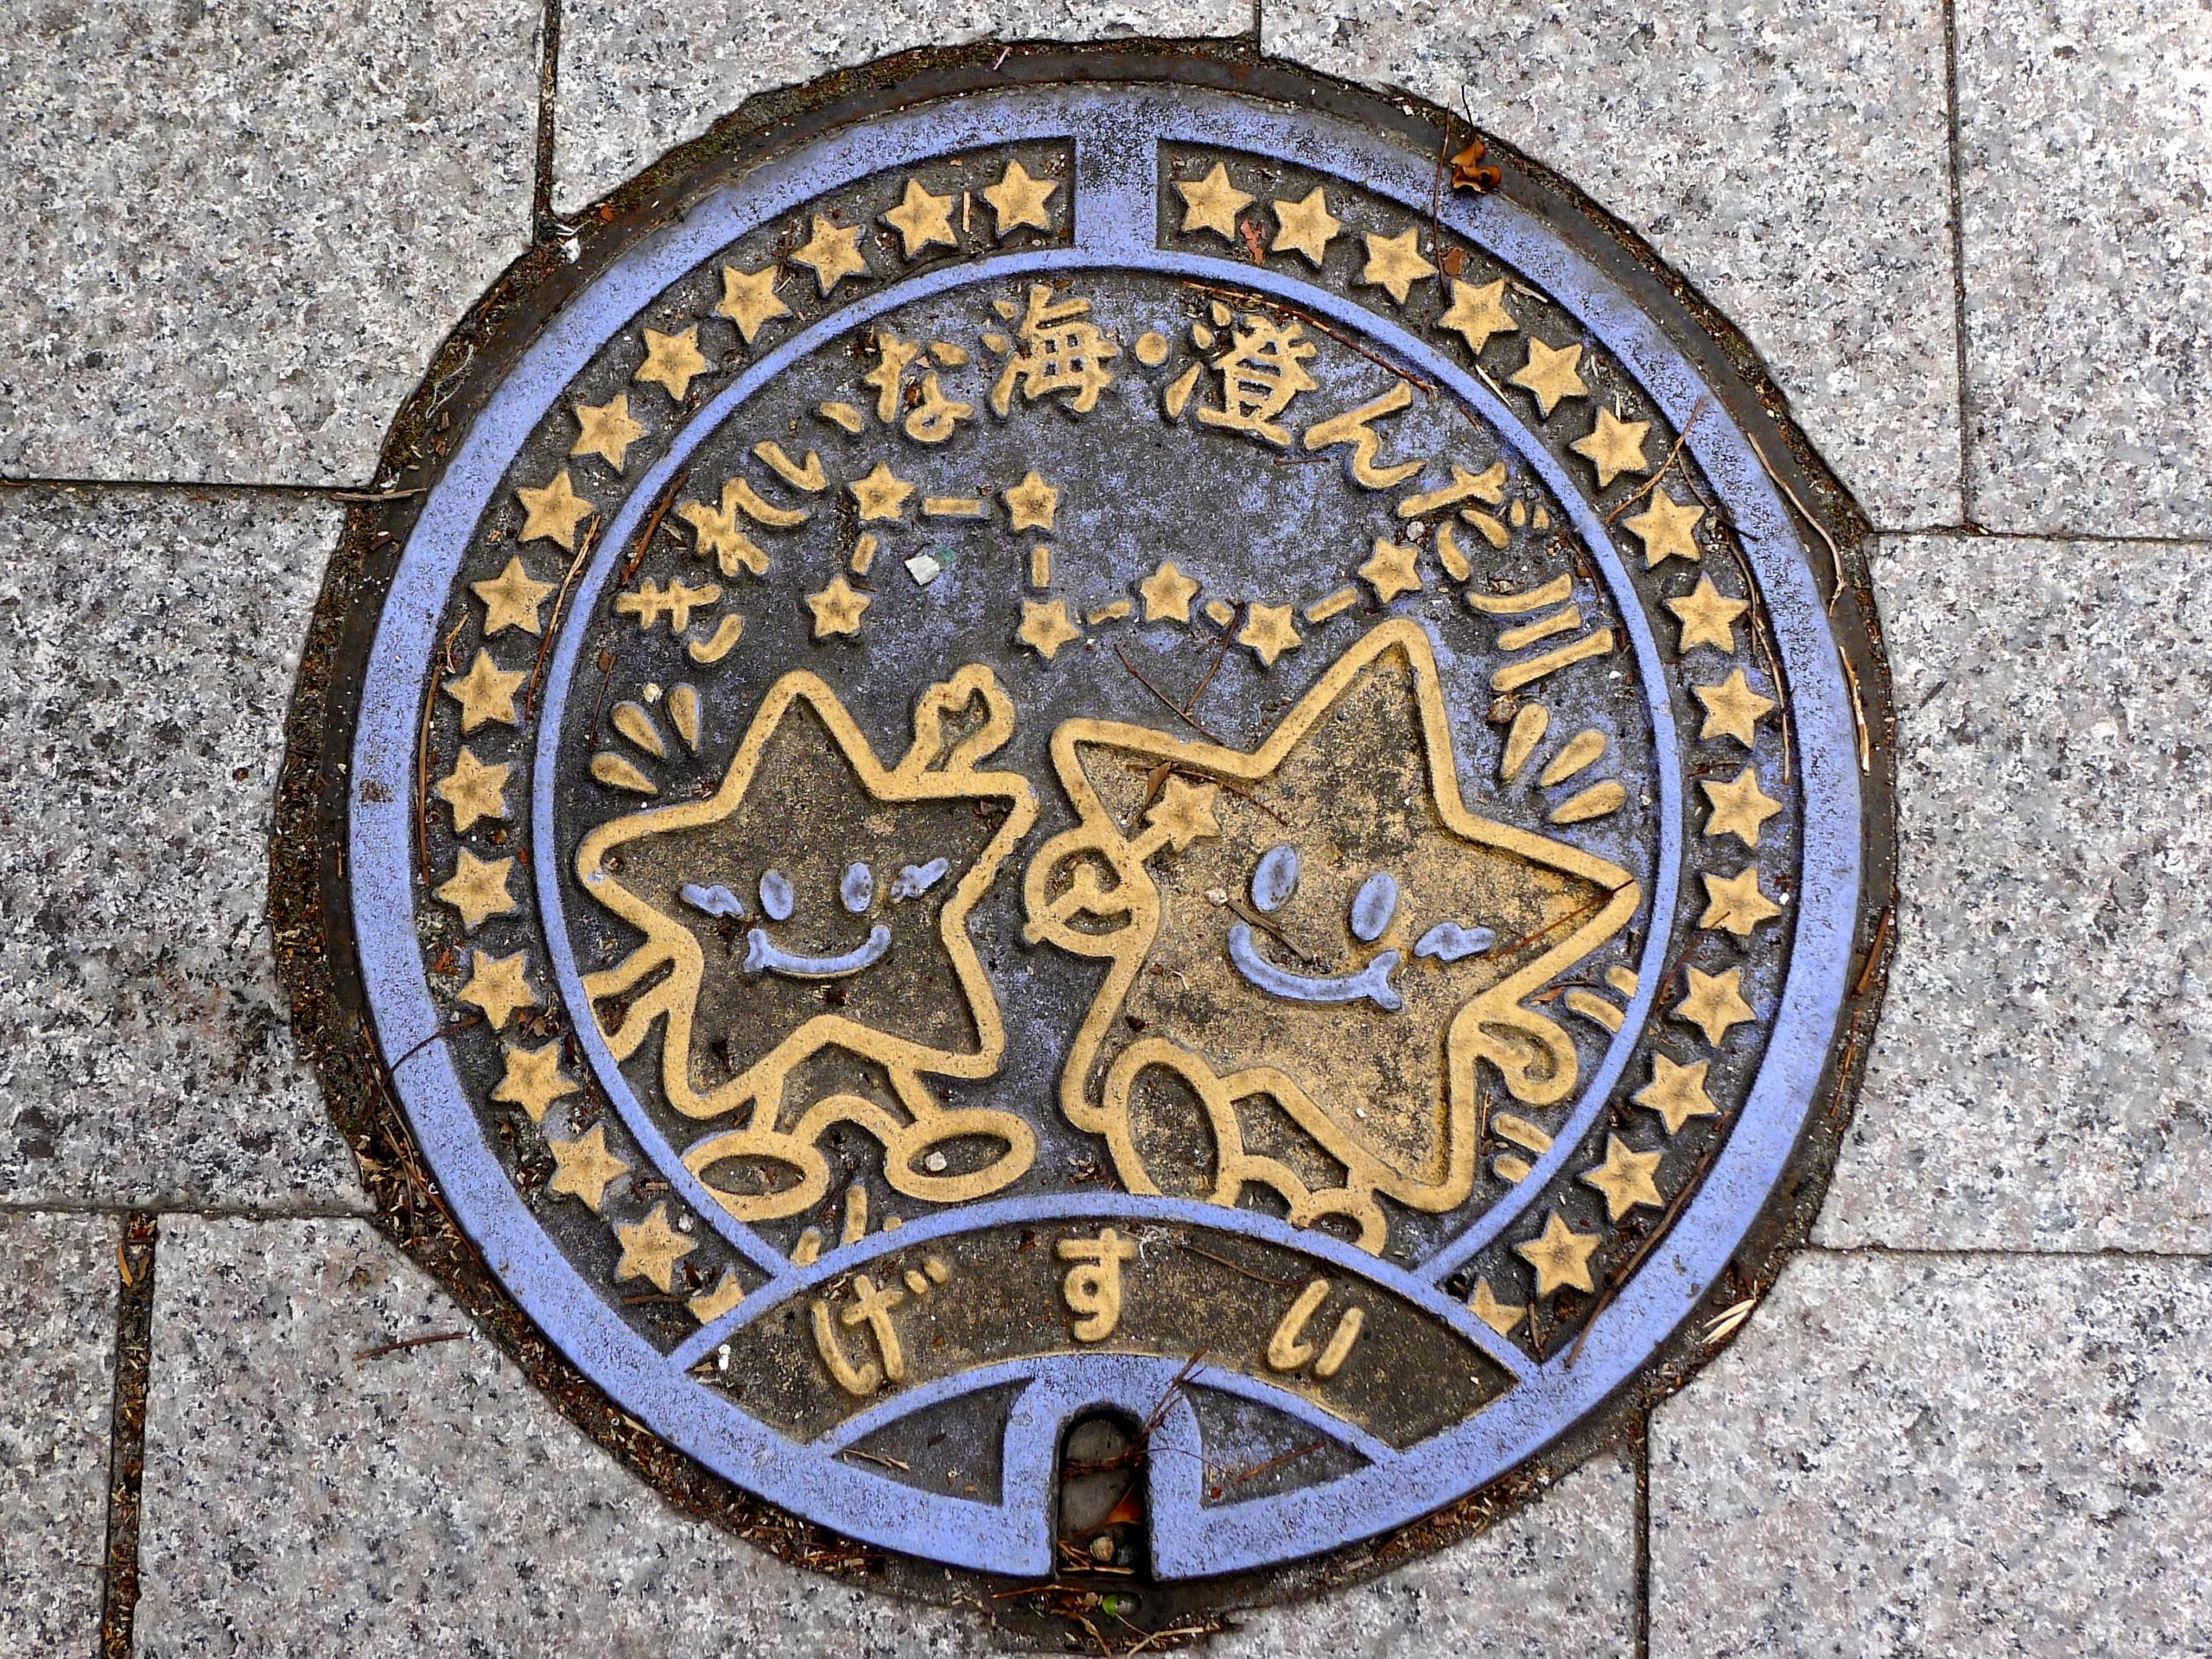 The Manhole Covers In Japan Are Absolutely Beautiful